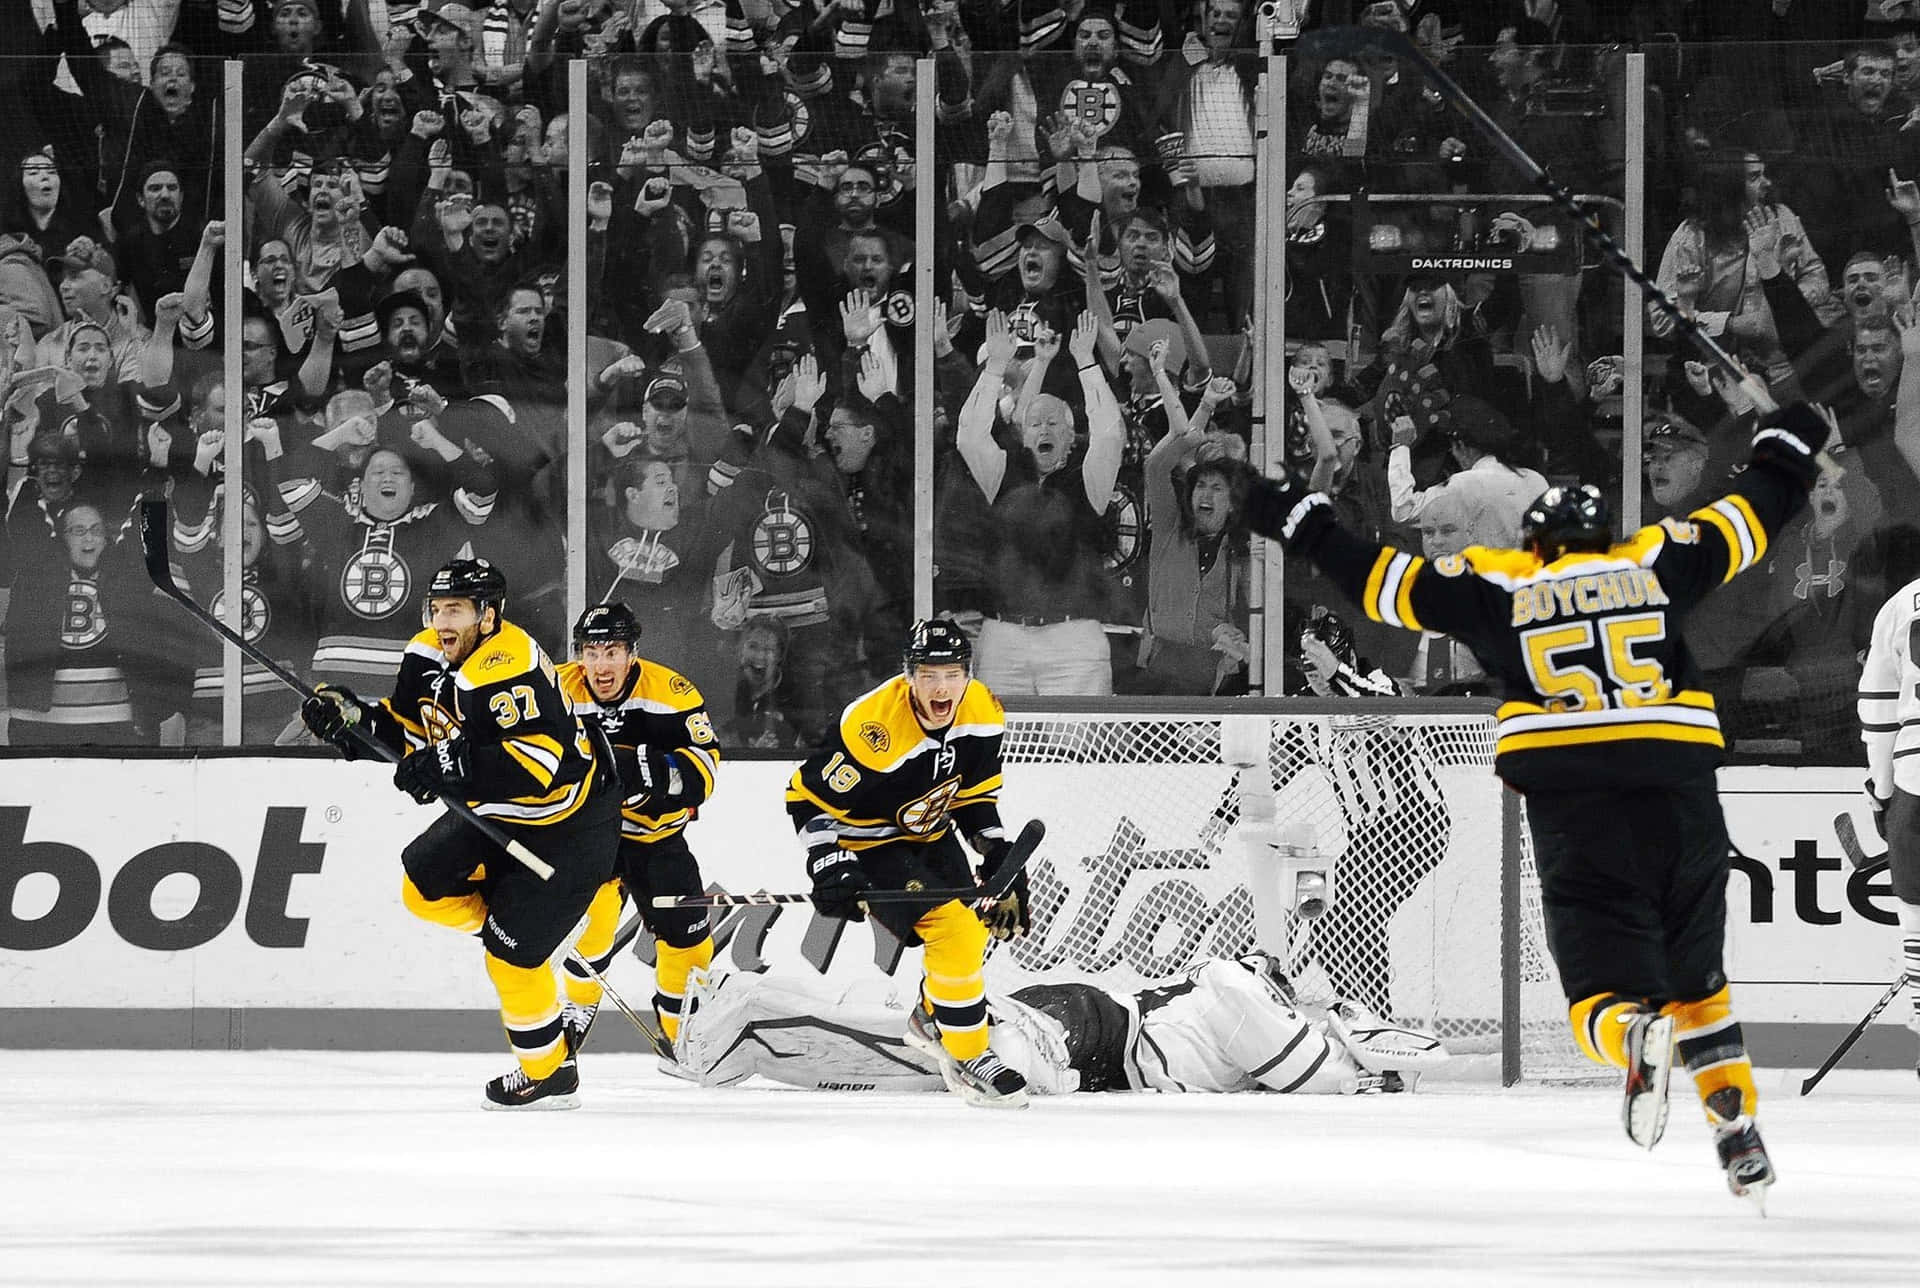 The Boston Bruins – Taking the ice in style